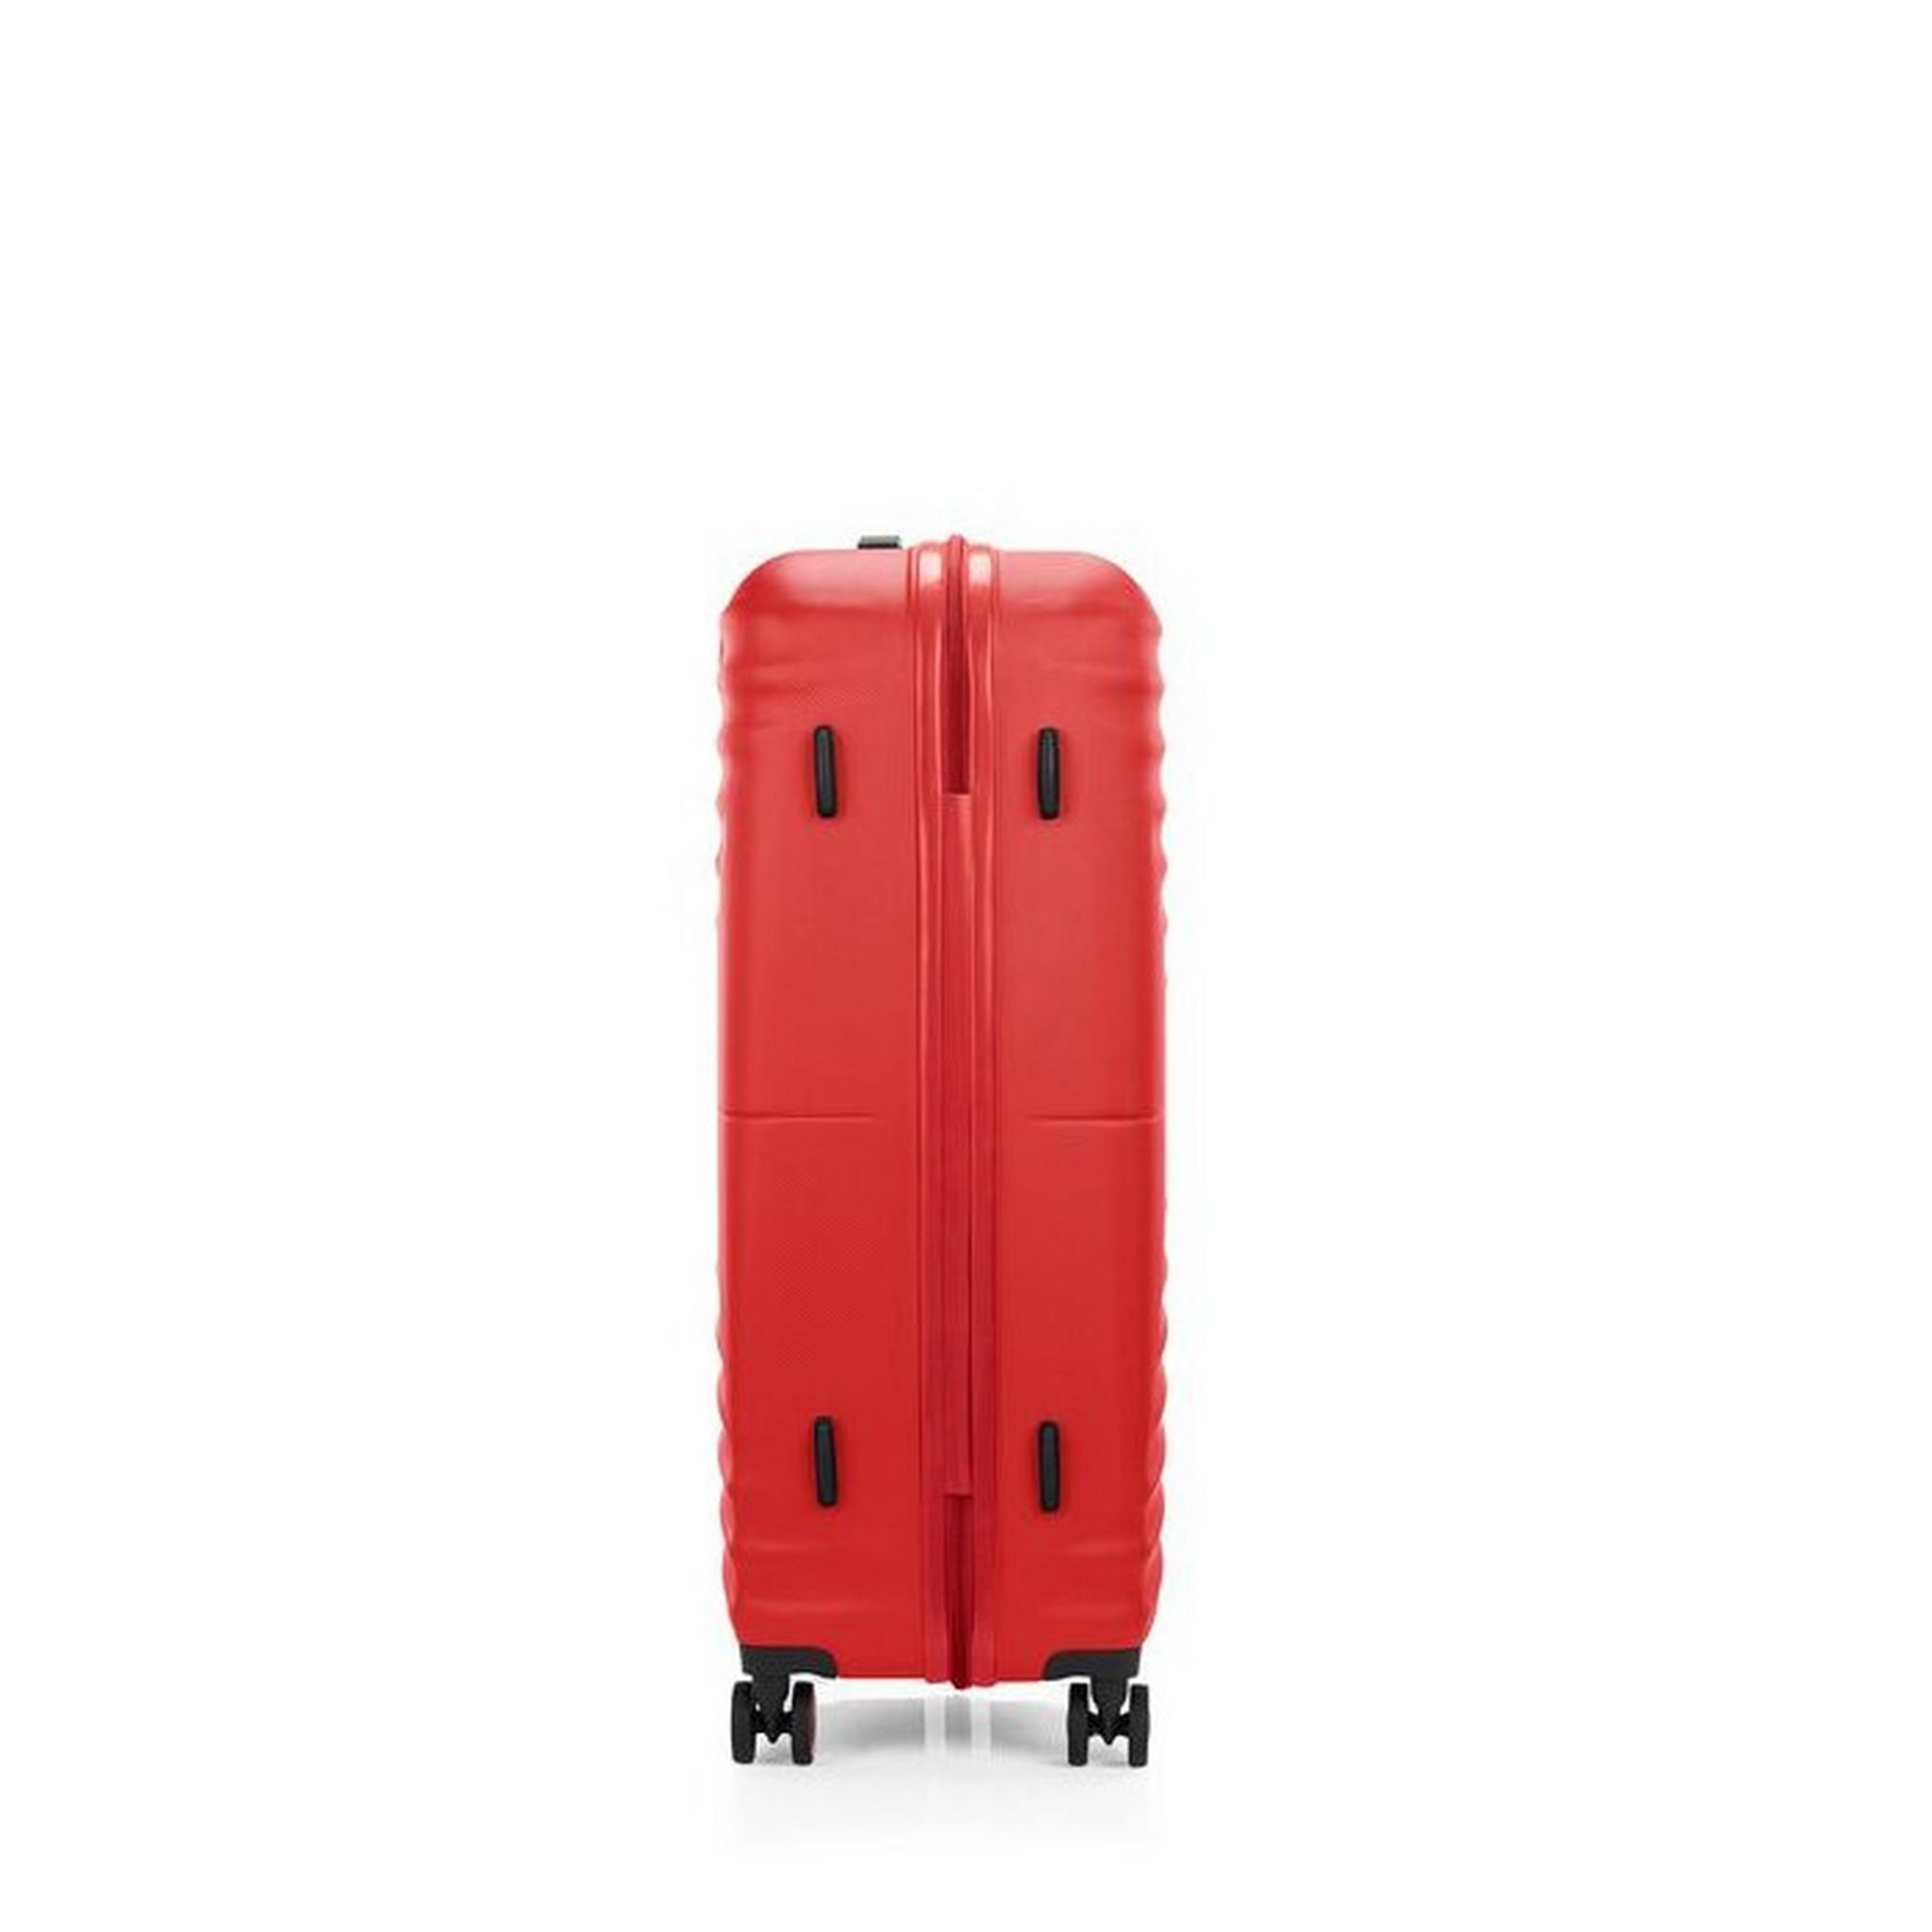 American Tourister TWIST WAVES SPINNER 77CM Hard Luggage, QC6X00008 - Vivid Red